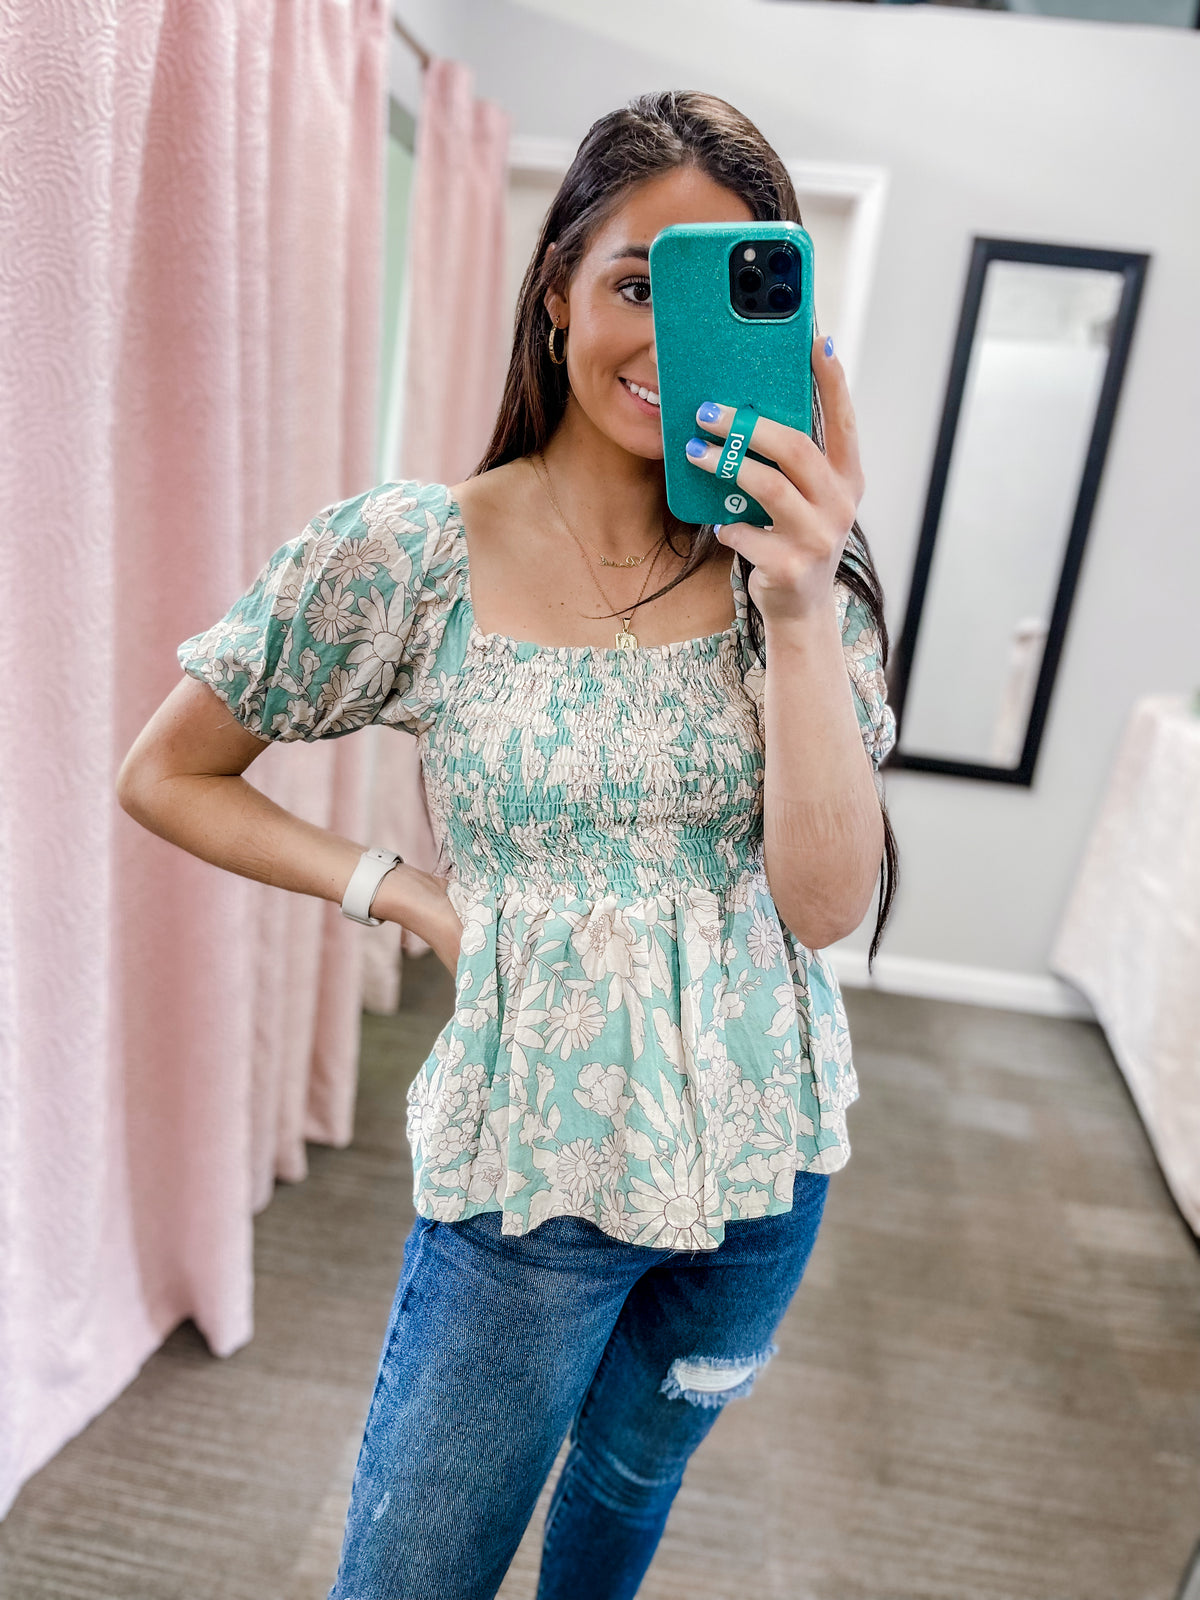 It's Your Destiny- Teal Smocked Top